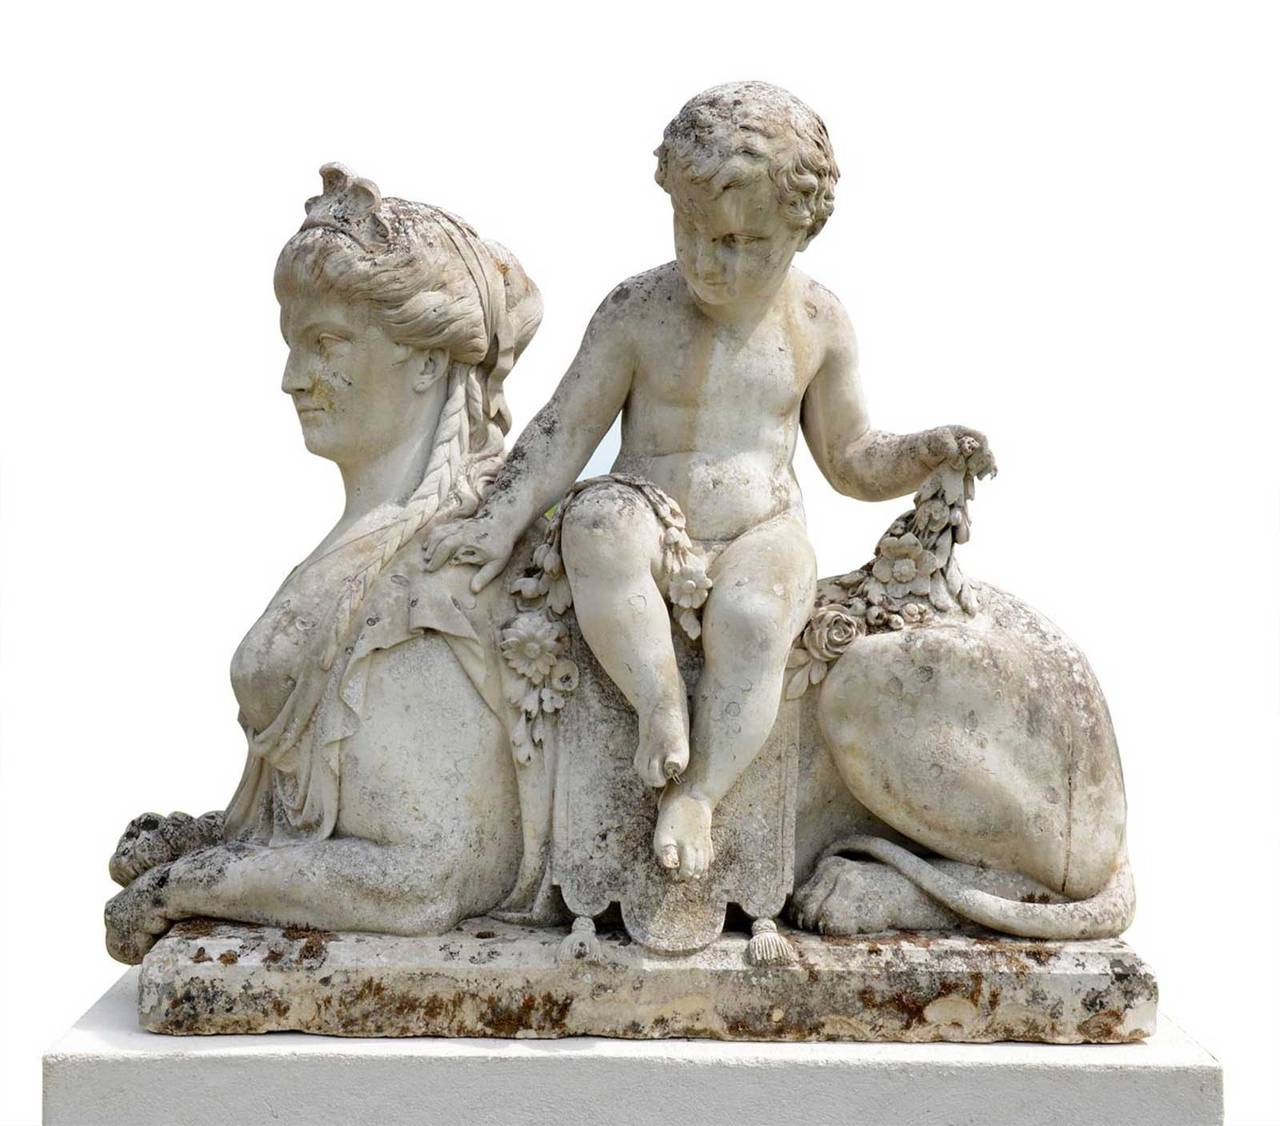 Exceptional and imposing pair of Saint-Maximin stone sphinxes, each being astride by a cherub holding a flowered garland. Made during the first half of the 19th century. These Sphinges are a reinterpretation of several famous models in which groups